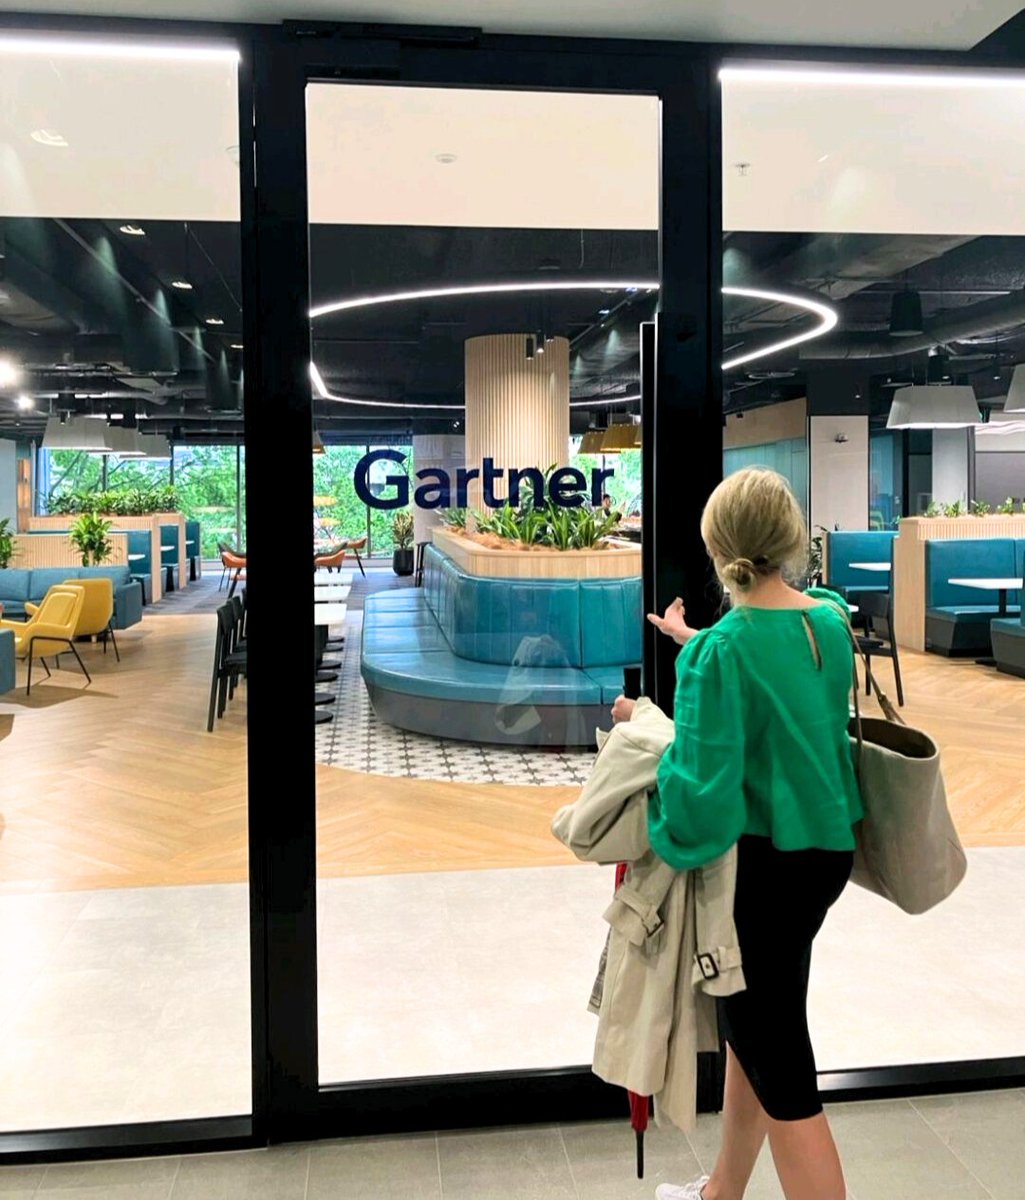 Open doors to a world of opportunities, learning and infinite success. 

Thinking about joining us at #LifeAtGartner? Apply now: gtnr.it/43O5q6S

#Careers